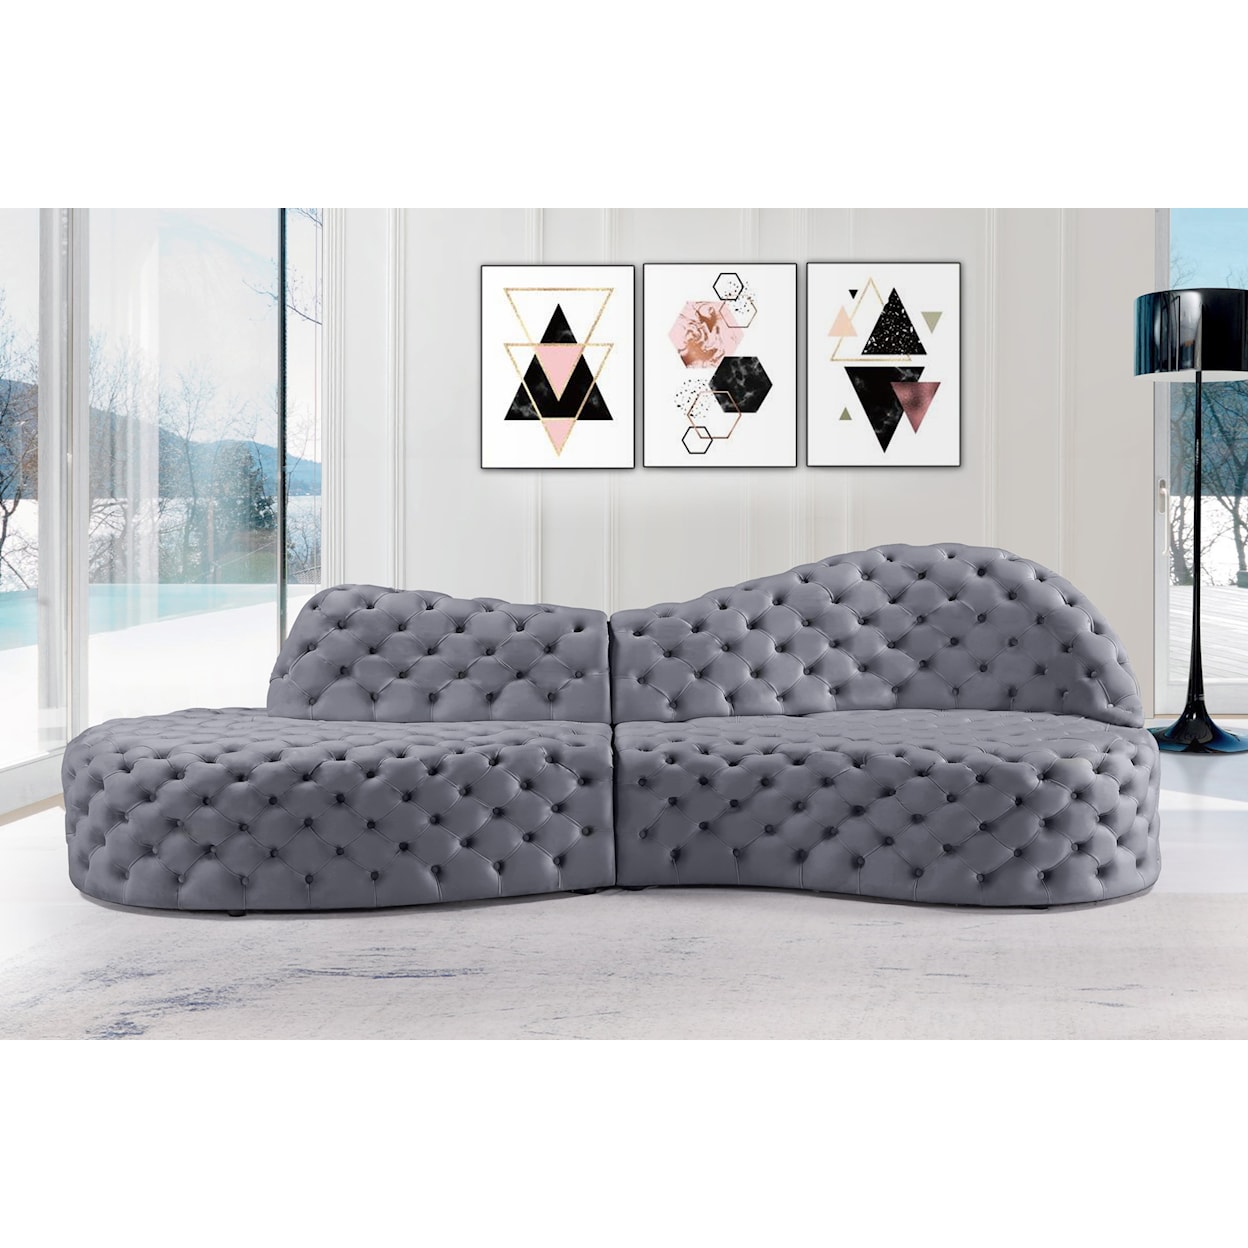 Meridian Furniture Royal 2pc. Sectional